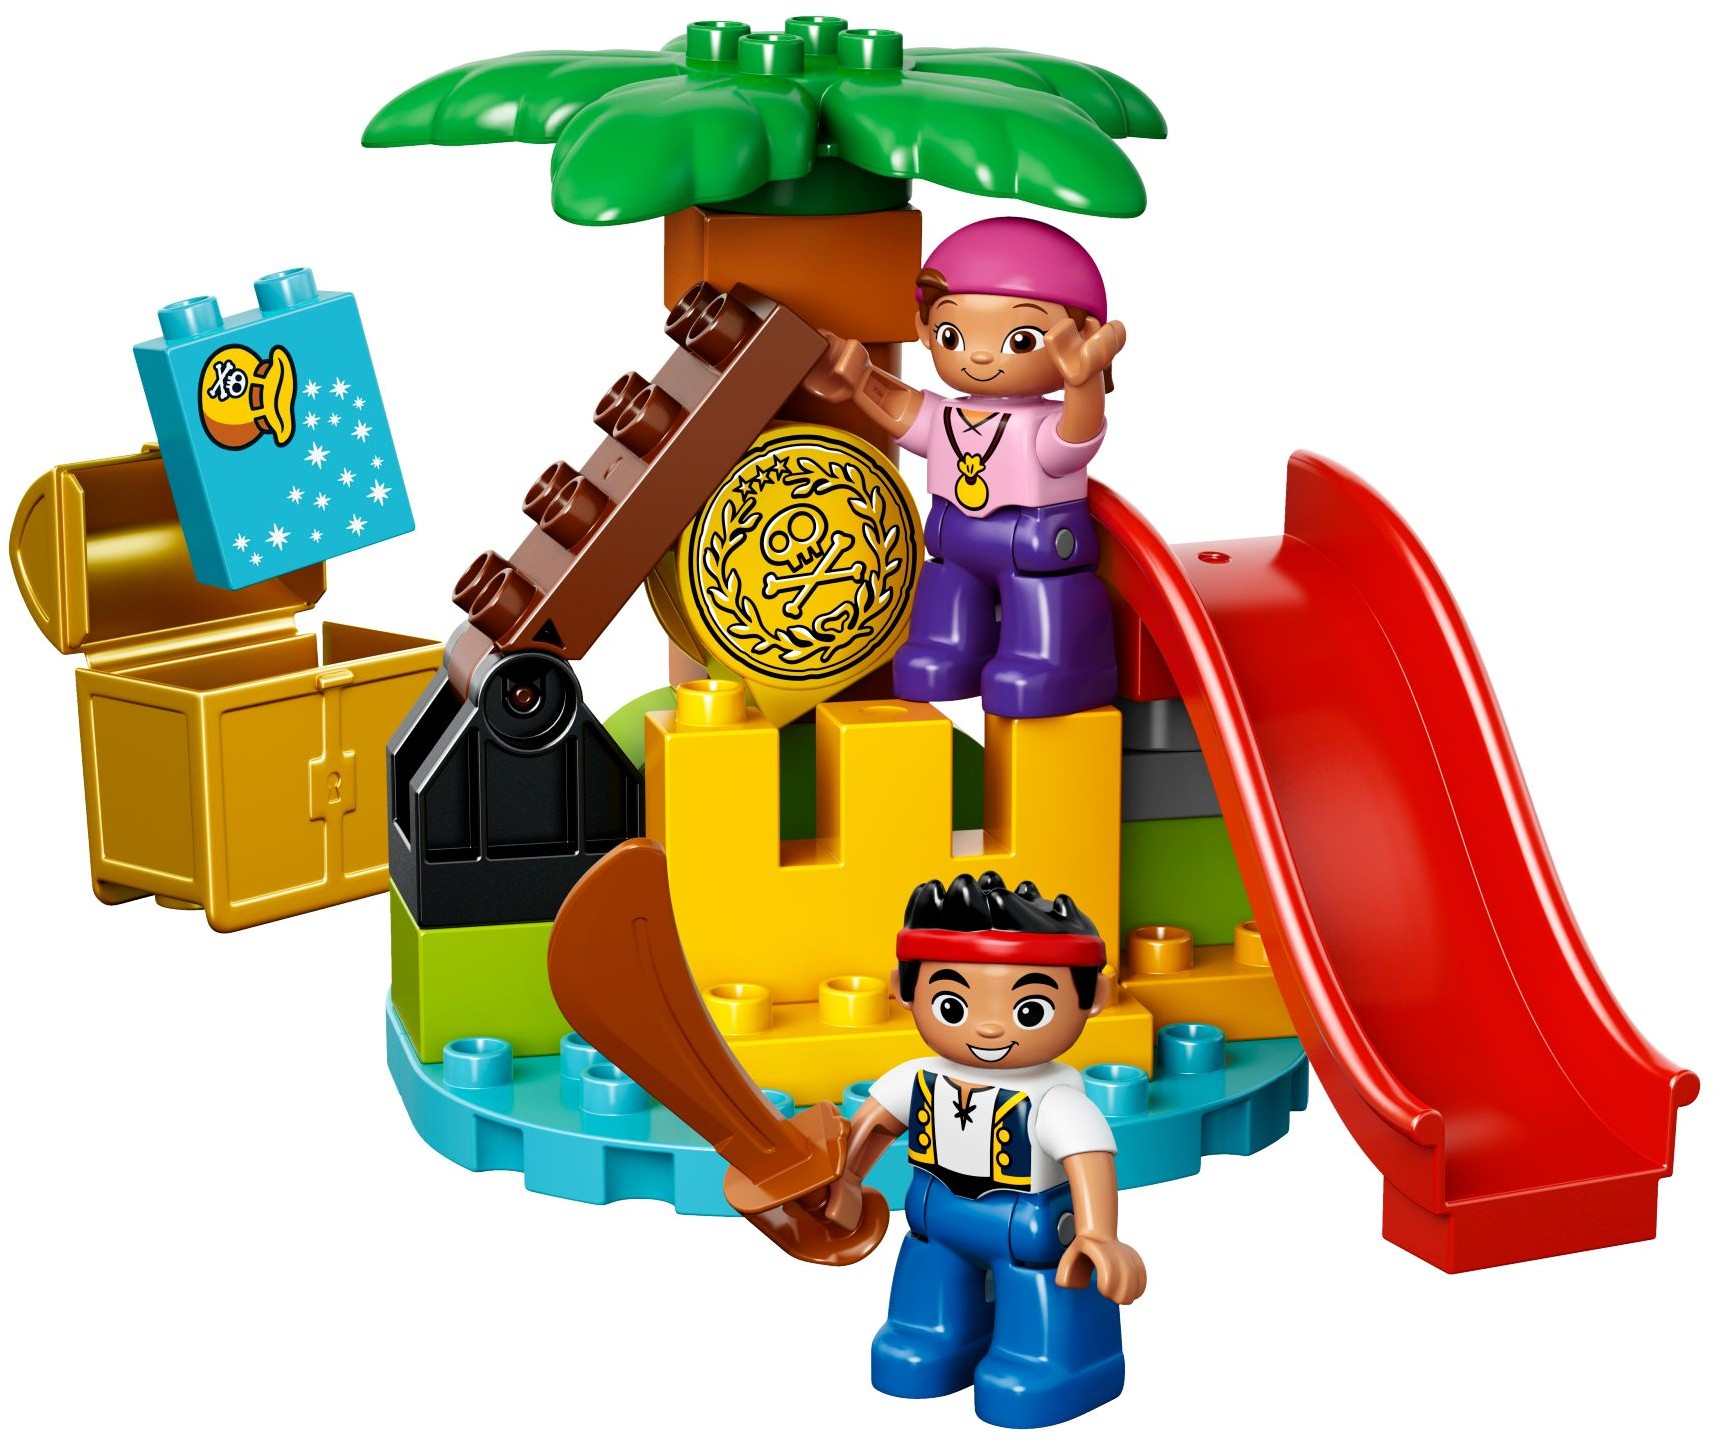 LEGO Duplo Jake and the Never Land Pirates